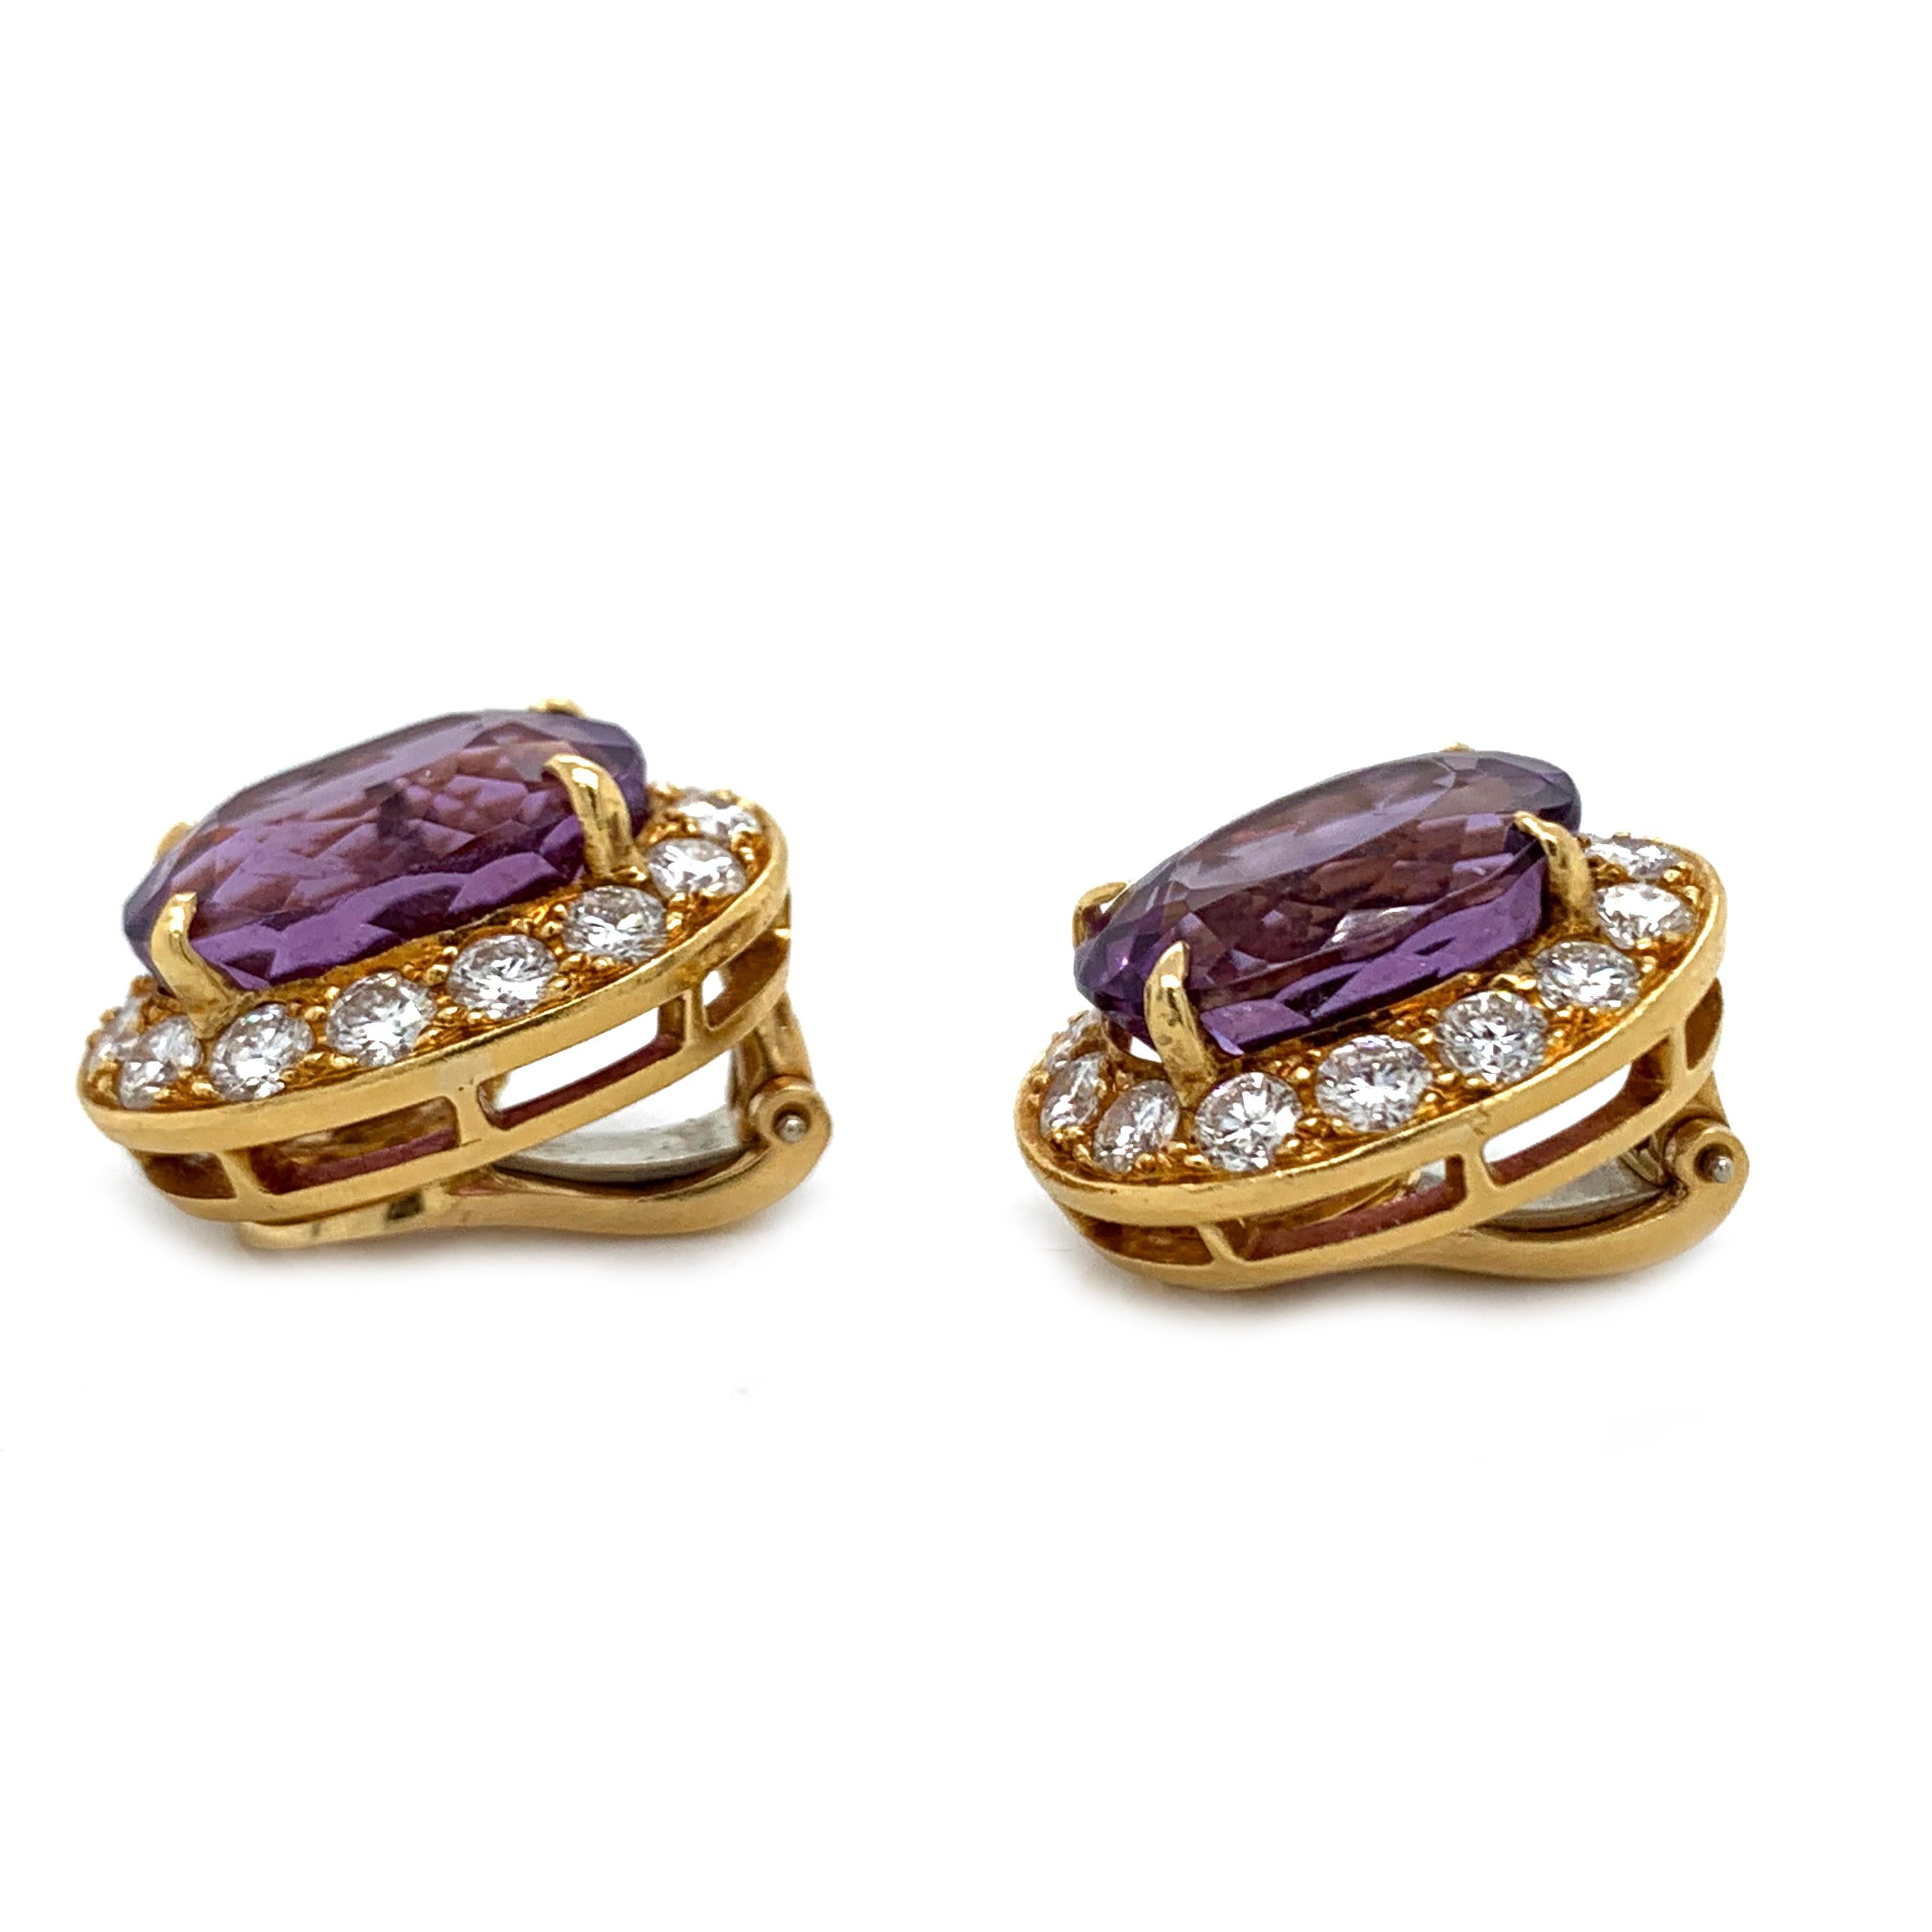 A stunning pair of 1980's Vancleef & Arpels amethyst and diamond earrings are in excellent condition, with all proper hallmarks, stamped 